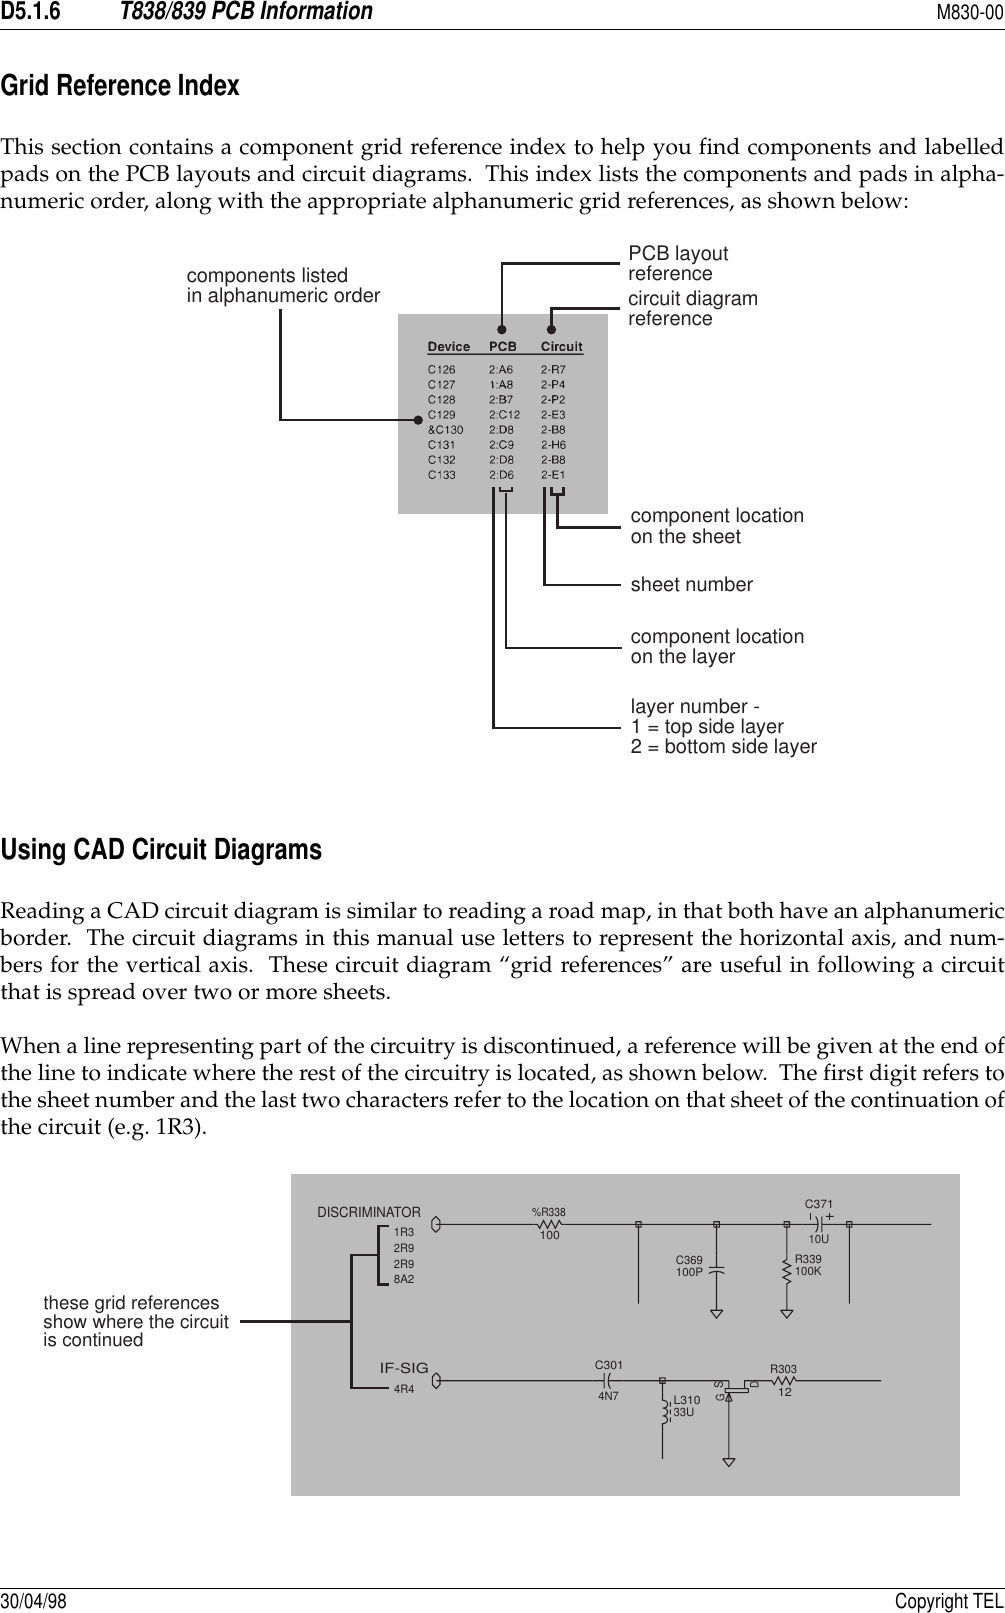 D5.1.6T838/839 PCB InformationM830-0030/04/98 Copyright TELGrid Reference IndexThis section contains a component grid reference index to help you find components and labelledpads on the PCB layouts and circuit diagrams.  This index lists the components and pads in alpha-numeric order, along with the appropriate alphanumeric grid references, as shown below:Using CAD Circuit DiagramsReading a CAD circuit diagram is similar to reading a road map, in that both have an alphanumericborder.  The circuit diagrams in this manual use letters to represent the horizontal axis, and num-bers for the vertical axis.  These circuit diagram “grid references” are useful in following a circuitthat is spread over two or more sheets.When a line representing part of the circuitry is discontinued, a reference will be given at the end ofthe line to indicate where the rest of the circuitry is located, as shown below.  The first digit refers tothe sheet number and the last two characters refer to the location on that sheet of the continuation ofthe circuit (e.g. 1R3).circuit diagramreferencePCB layoutreferencecomponents listedin alphanumeric orderlayer number -1 = top side layer2 = bottom side layercomponent locationon the layersheet numbercomponent locationon the sheetC3014N7R30312DSGL31033UIF-SIG4R4C369100PC37110UR339100K%R338100DISCRIMINATOR1R32R92R98A2these grid referencesshow where the circuitis continued